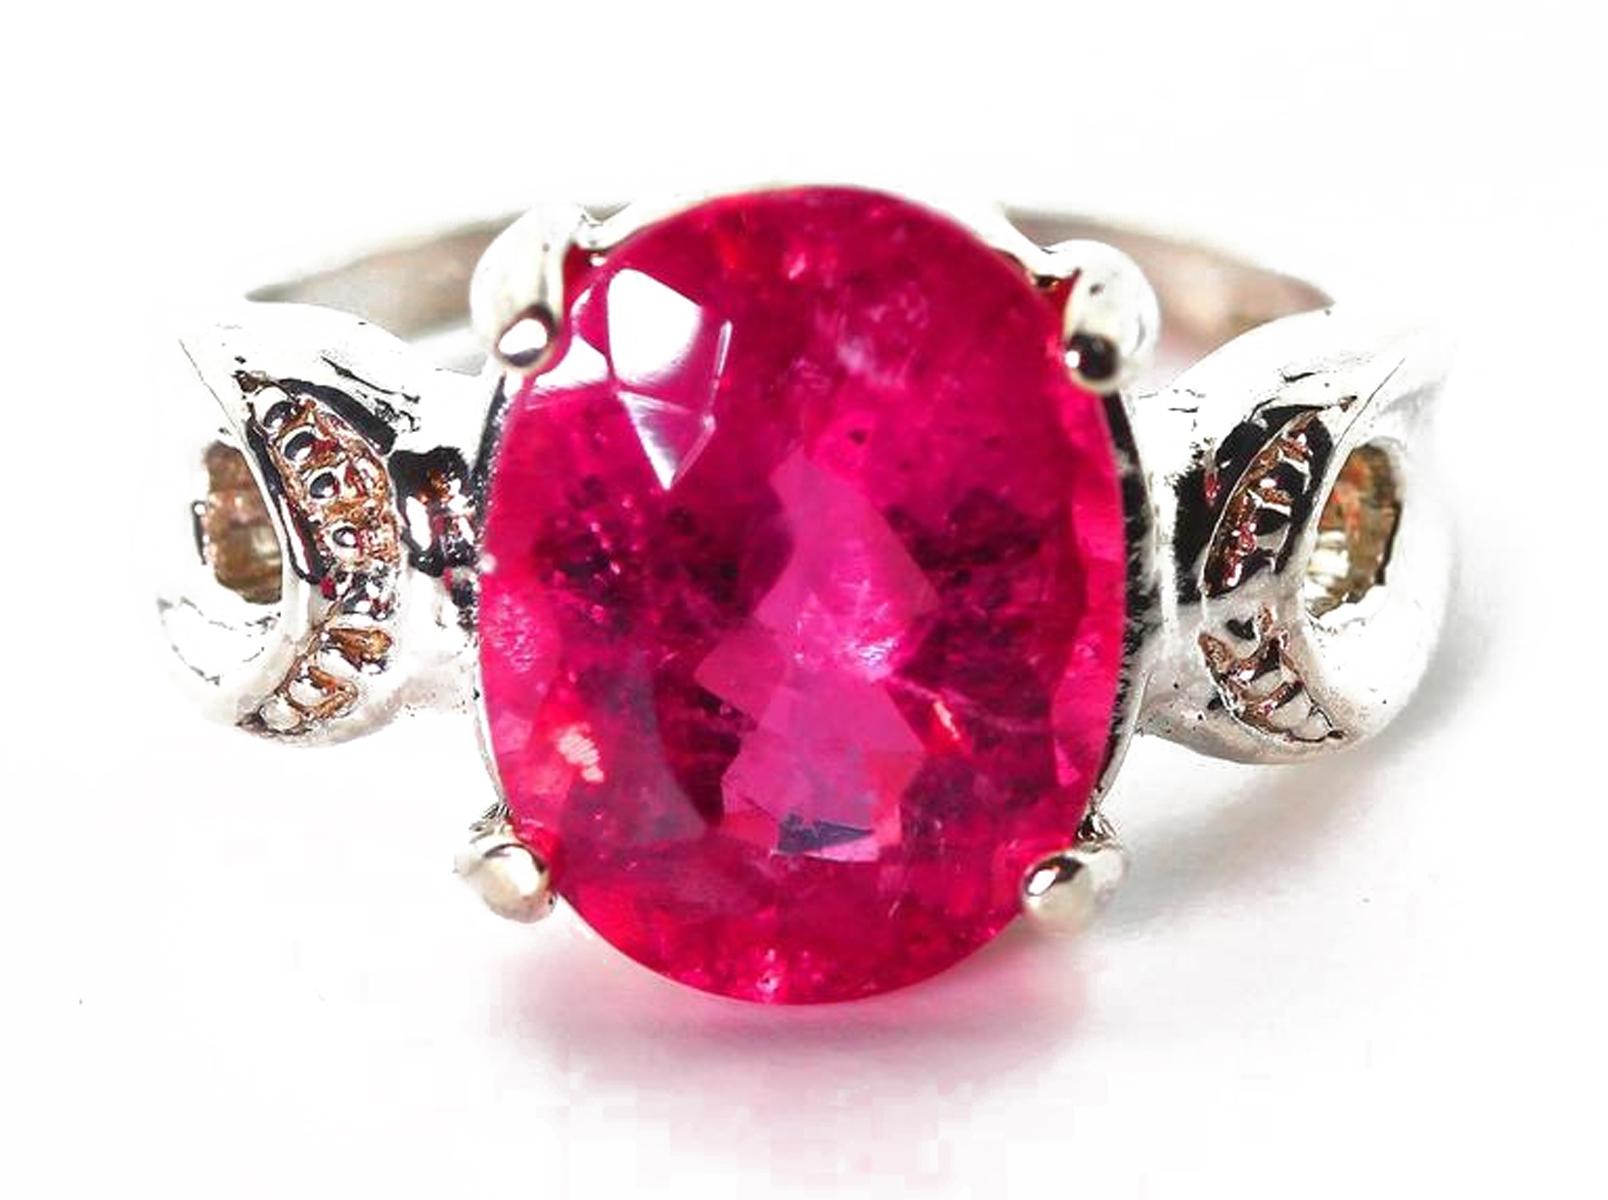 Sparkling glittering 3.95 Carats of oval Tourmaline.  This rare and unique beautiful color is between Pink and Magenta Brilliant with NO visible inclusions or white marks whatsoever ! !
Size:  11.75 mm x 8.9 mm
Ring:  Handmade in Sterling